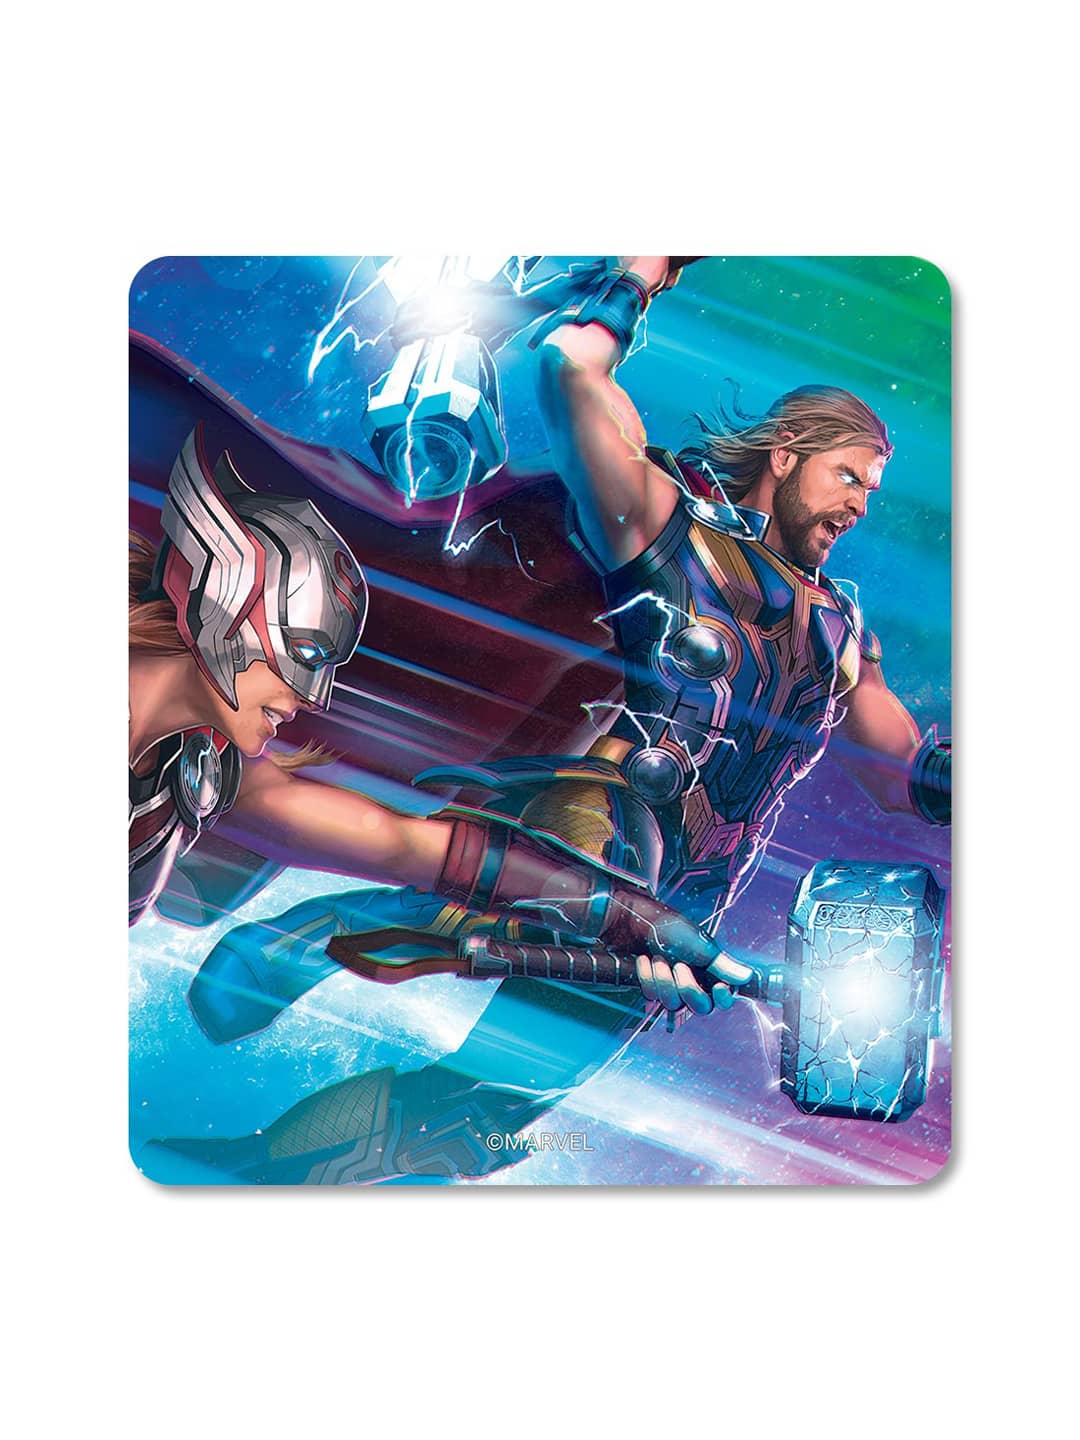 Buy Mighty and Worthy - Macmerise Mouse Pad Mouse Pads Online